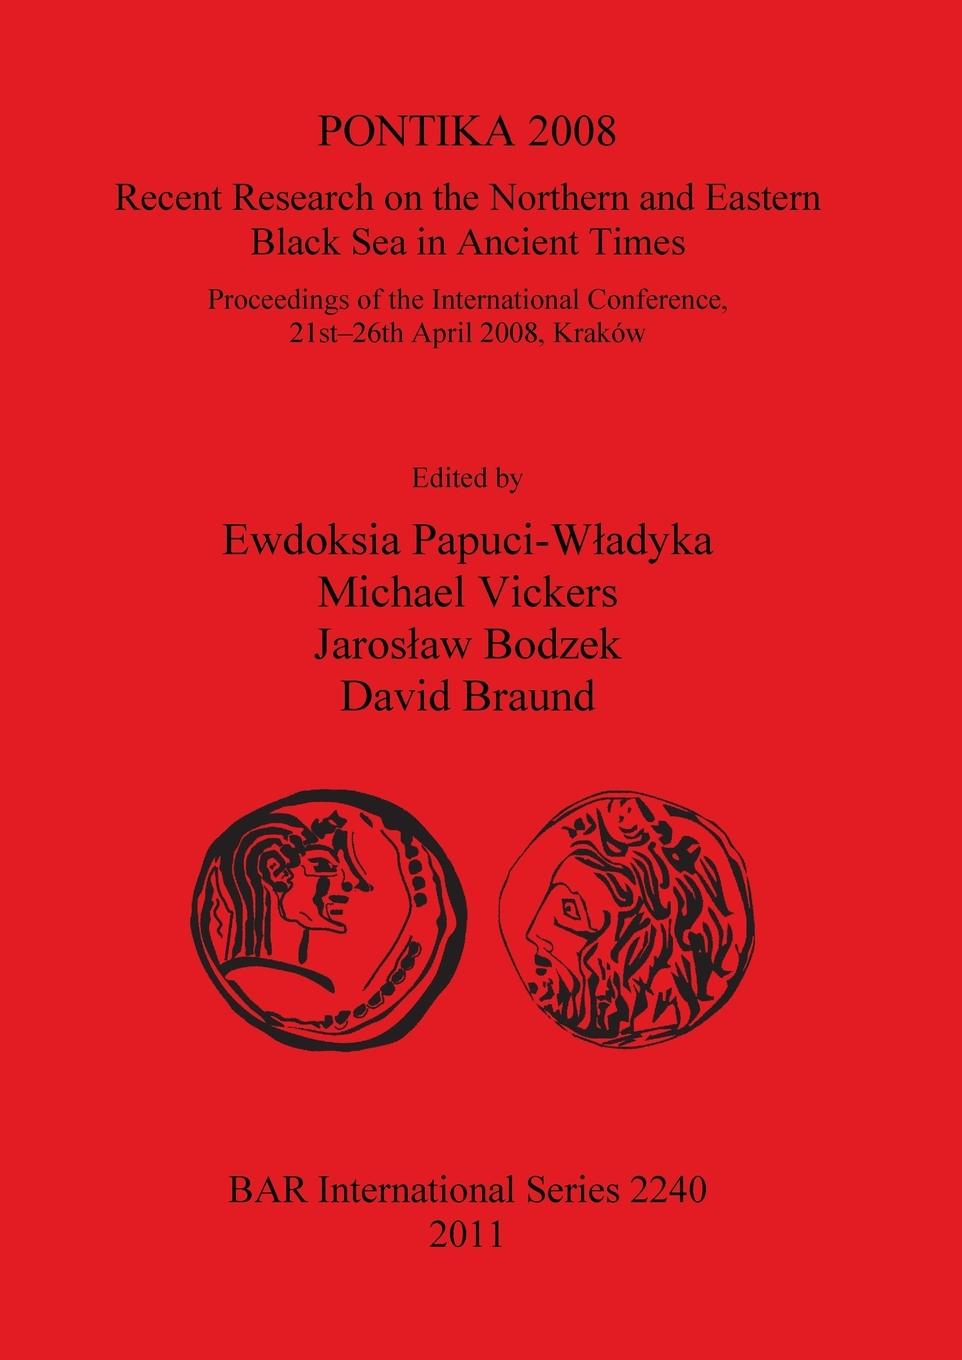 Pontika 2008: Recent Research on the Northern and Eastern Black Sea in Ancient Times - Papuci-Wladyka, Ewdoskia|Vickers, Michael|Bodzek, Jaroslaw